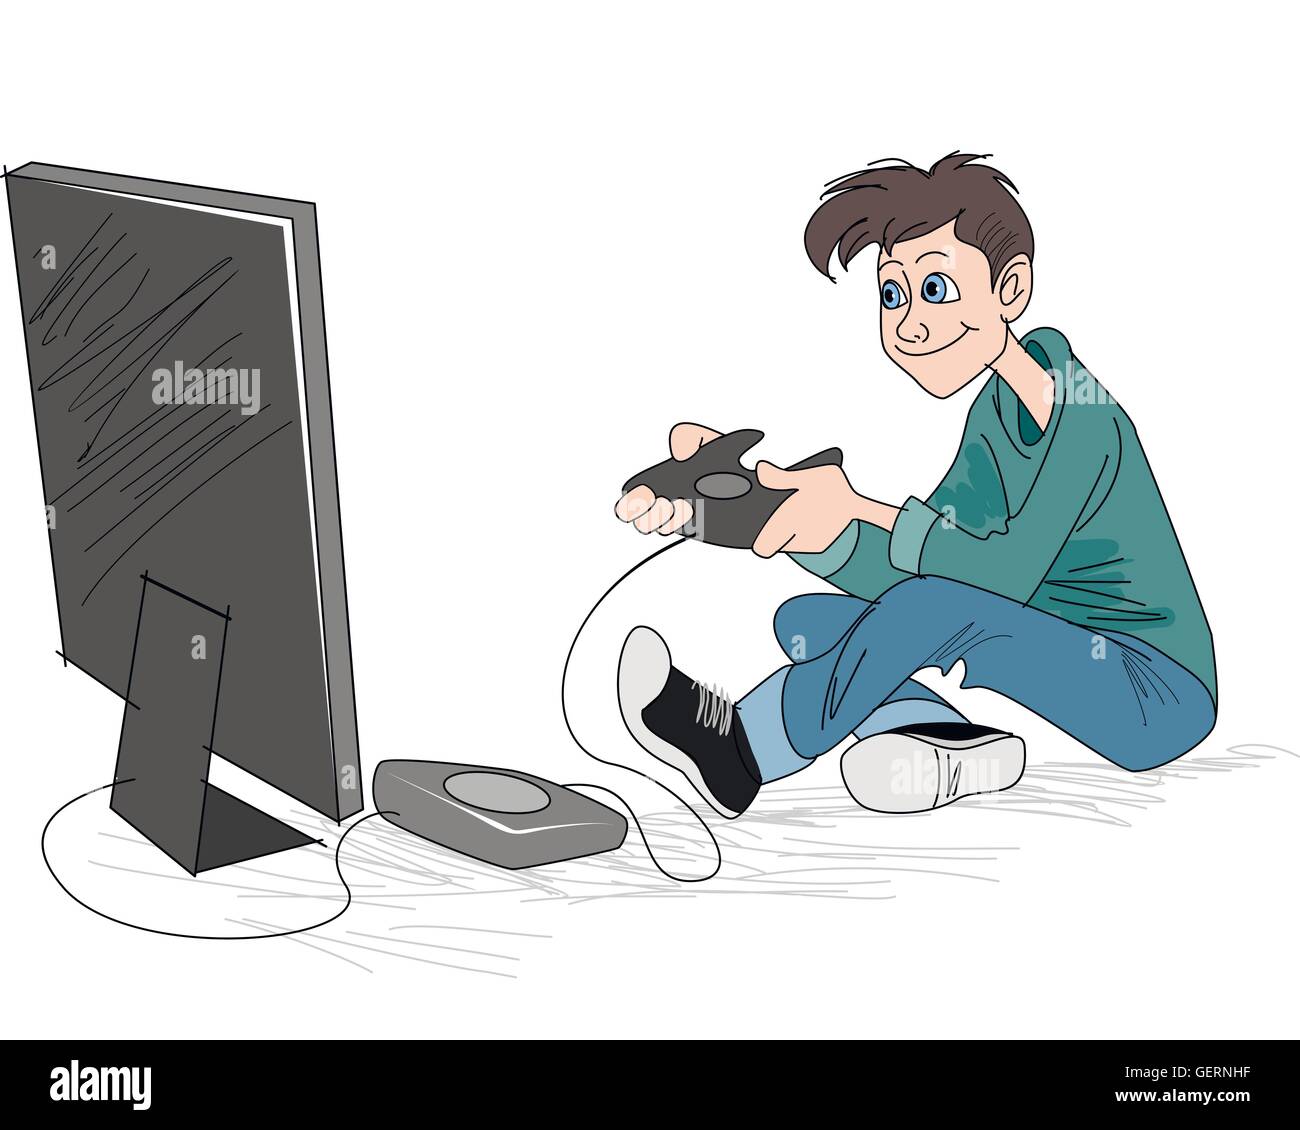 Premium Vector  A boy plays online games with a set of computer devices  online gaming oneline drawing